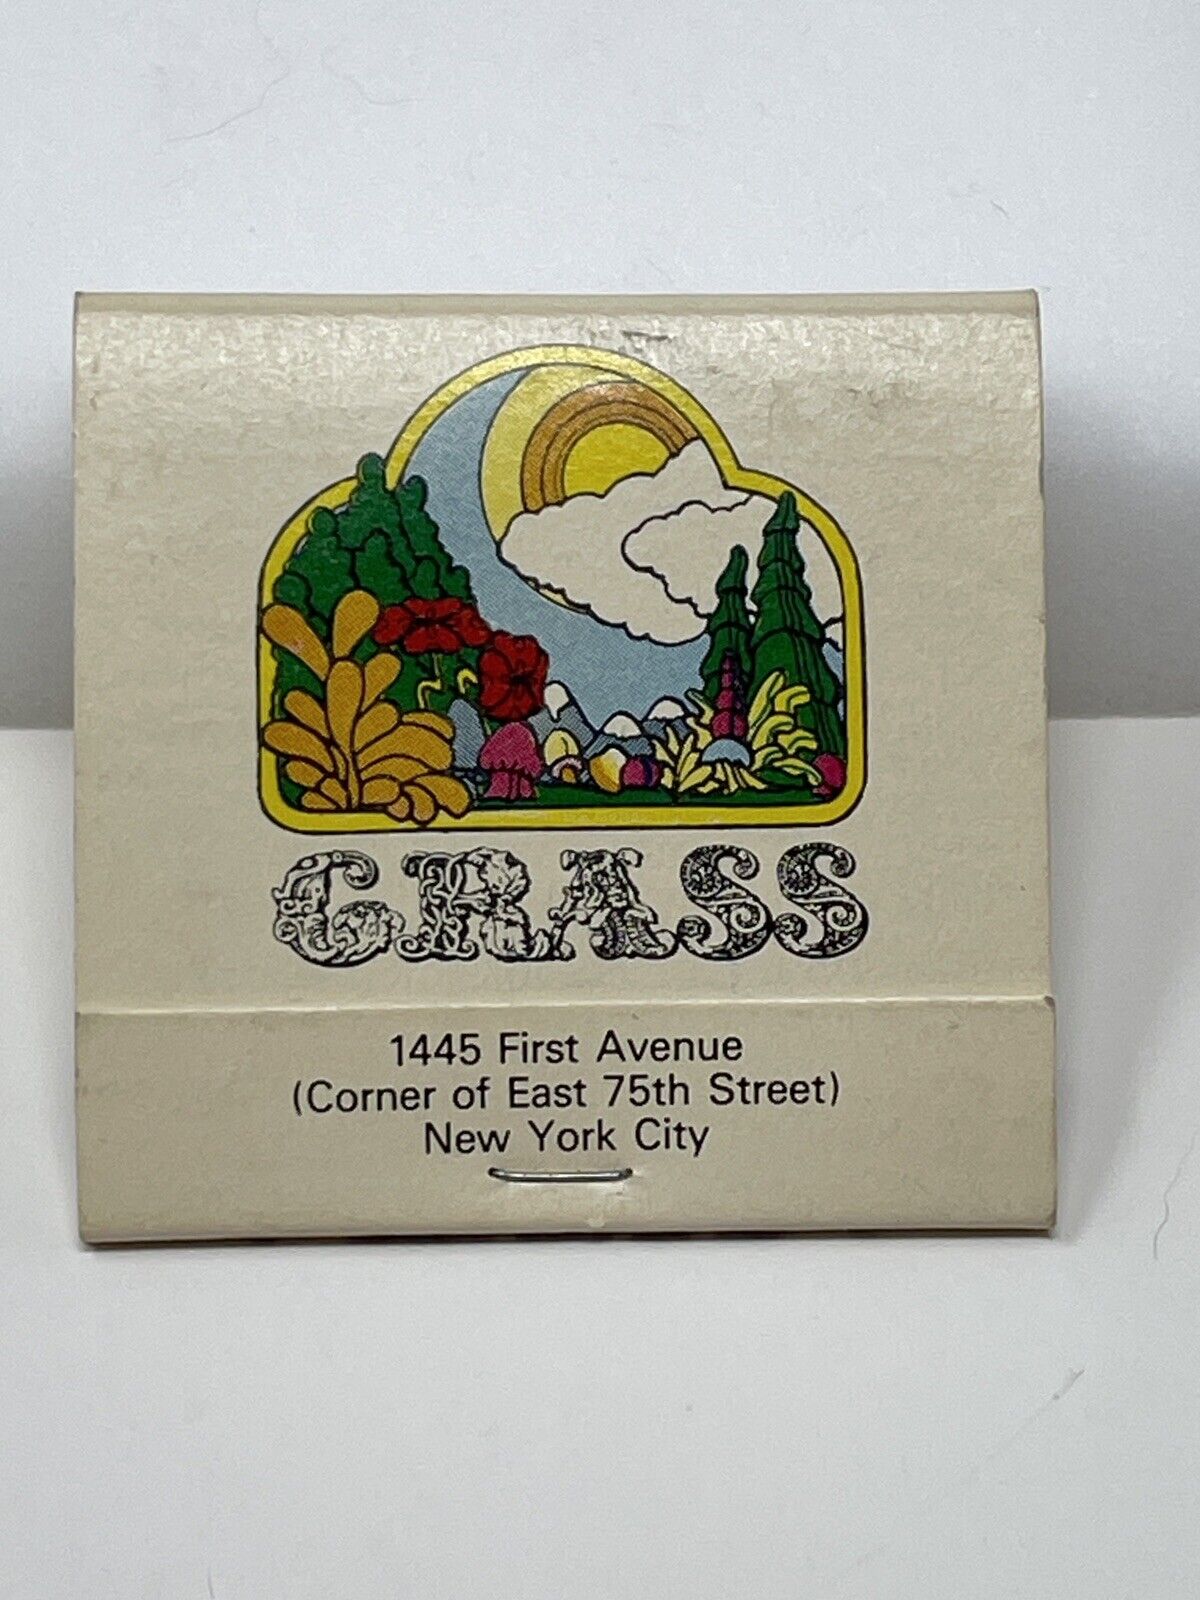 Vintage 1960s NYC Restaurant Matchbook - Grass - Early Organic Natural Food 